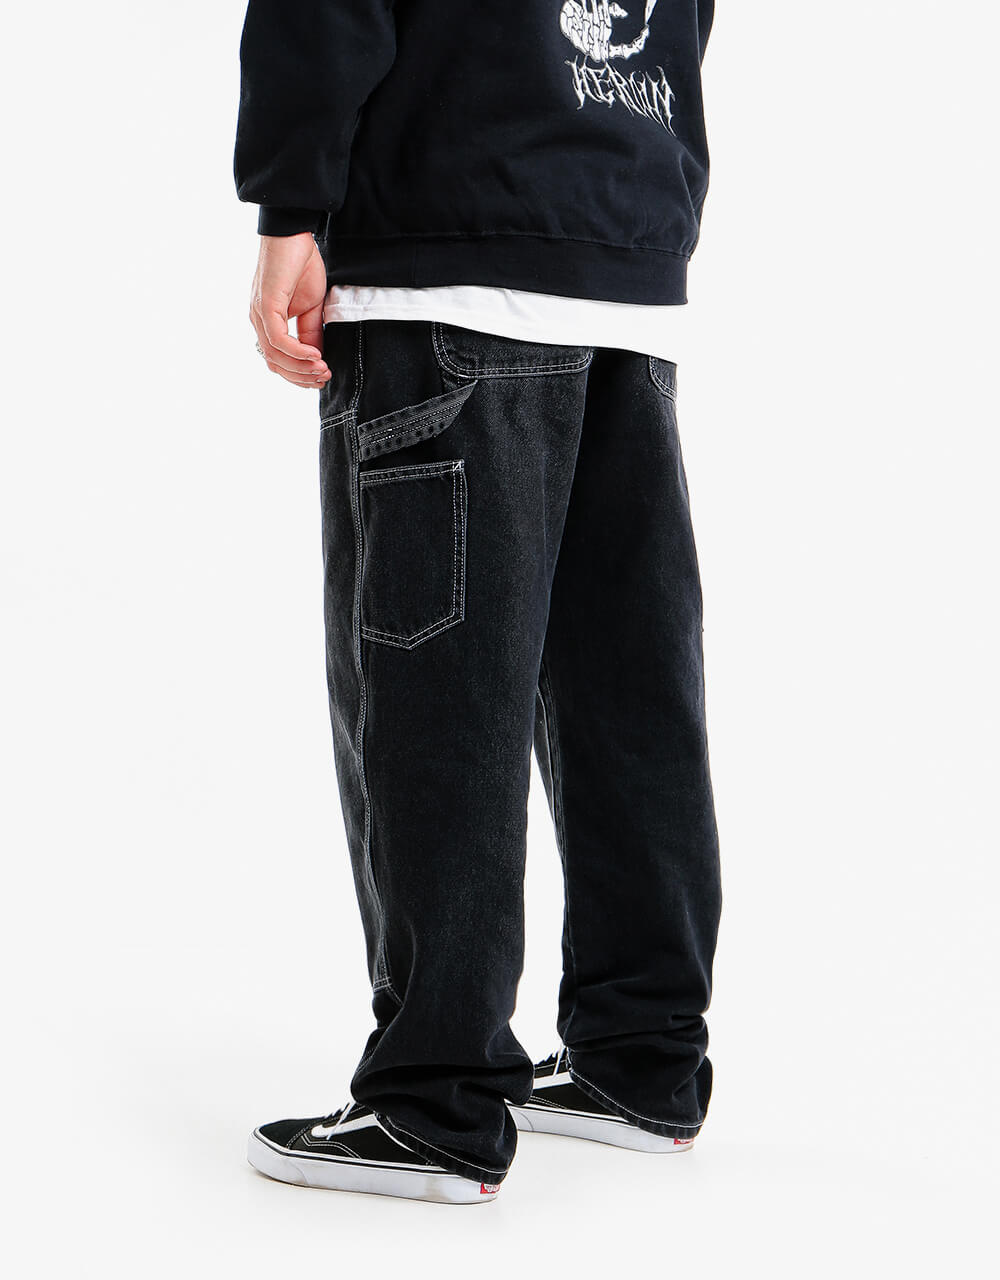 Route One Double Knee Denim Pants - Washed Black